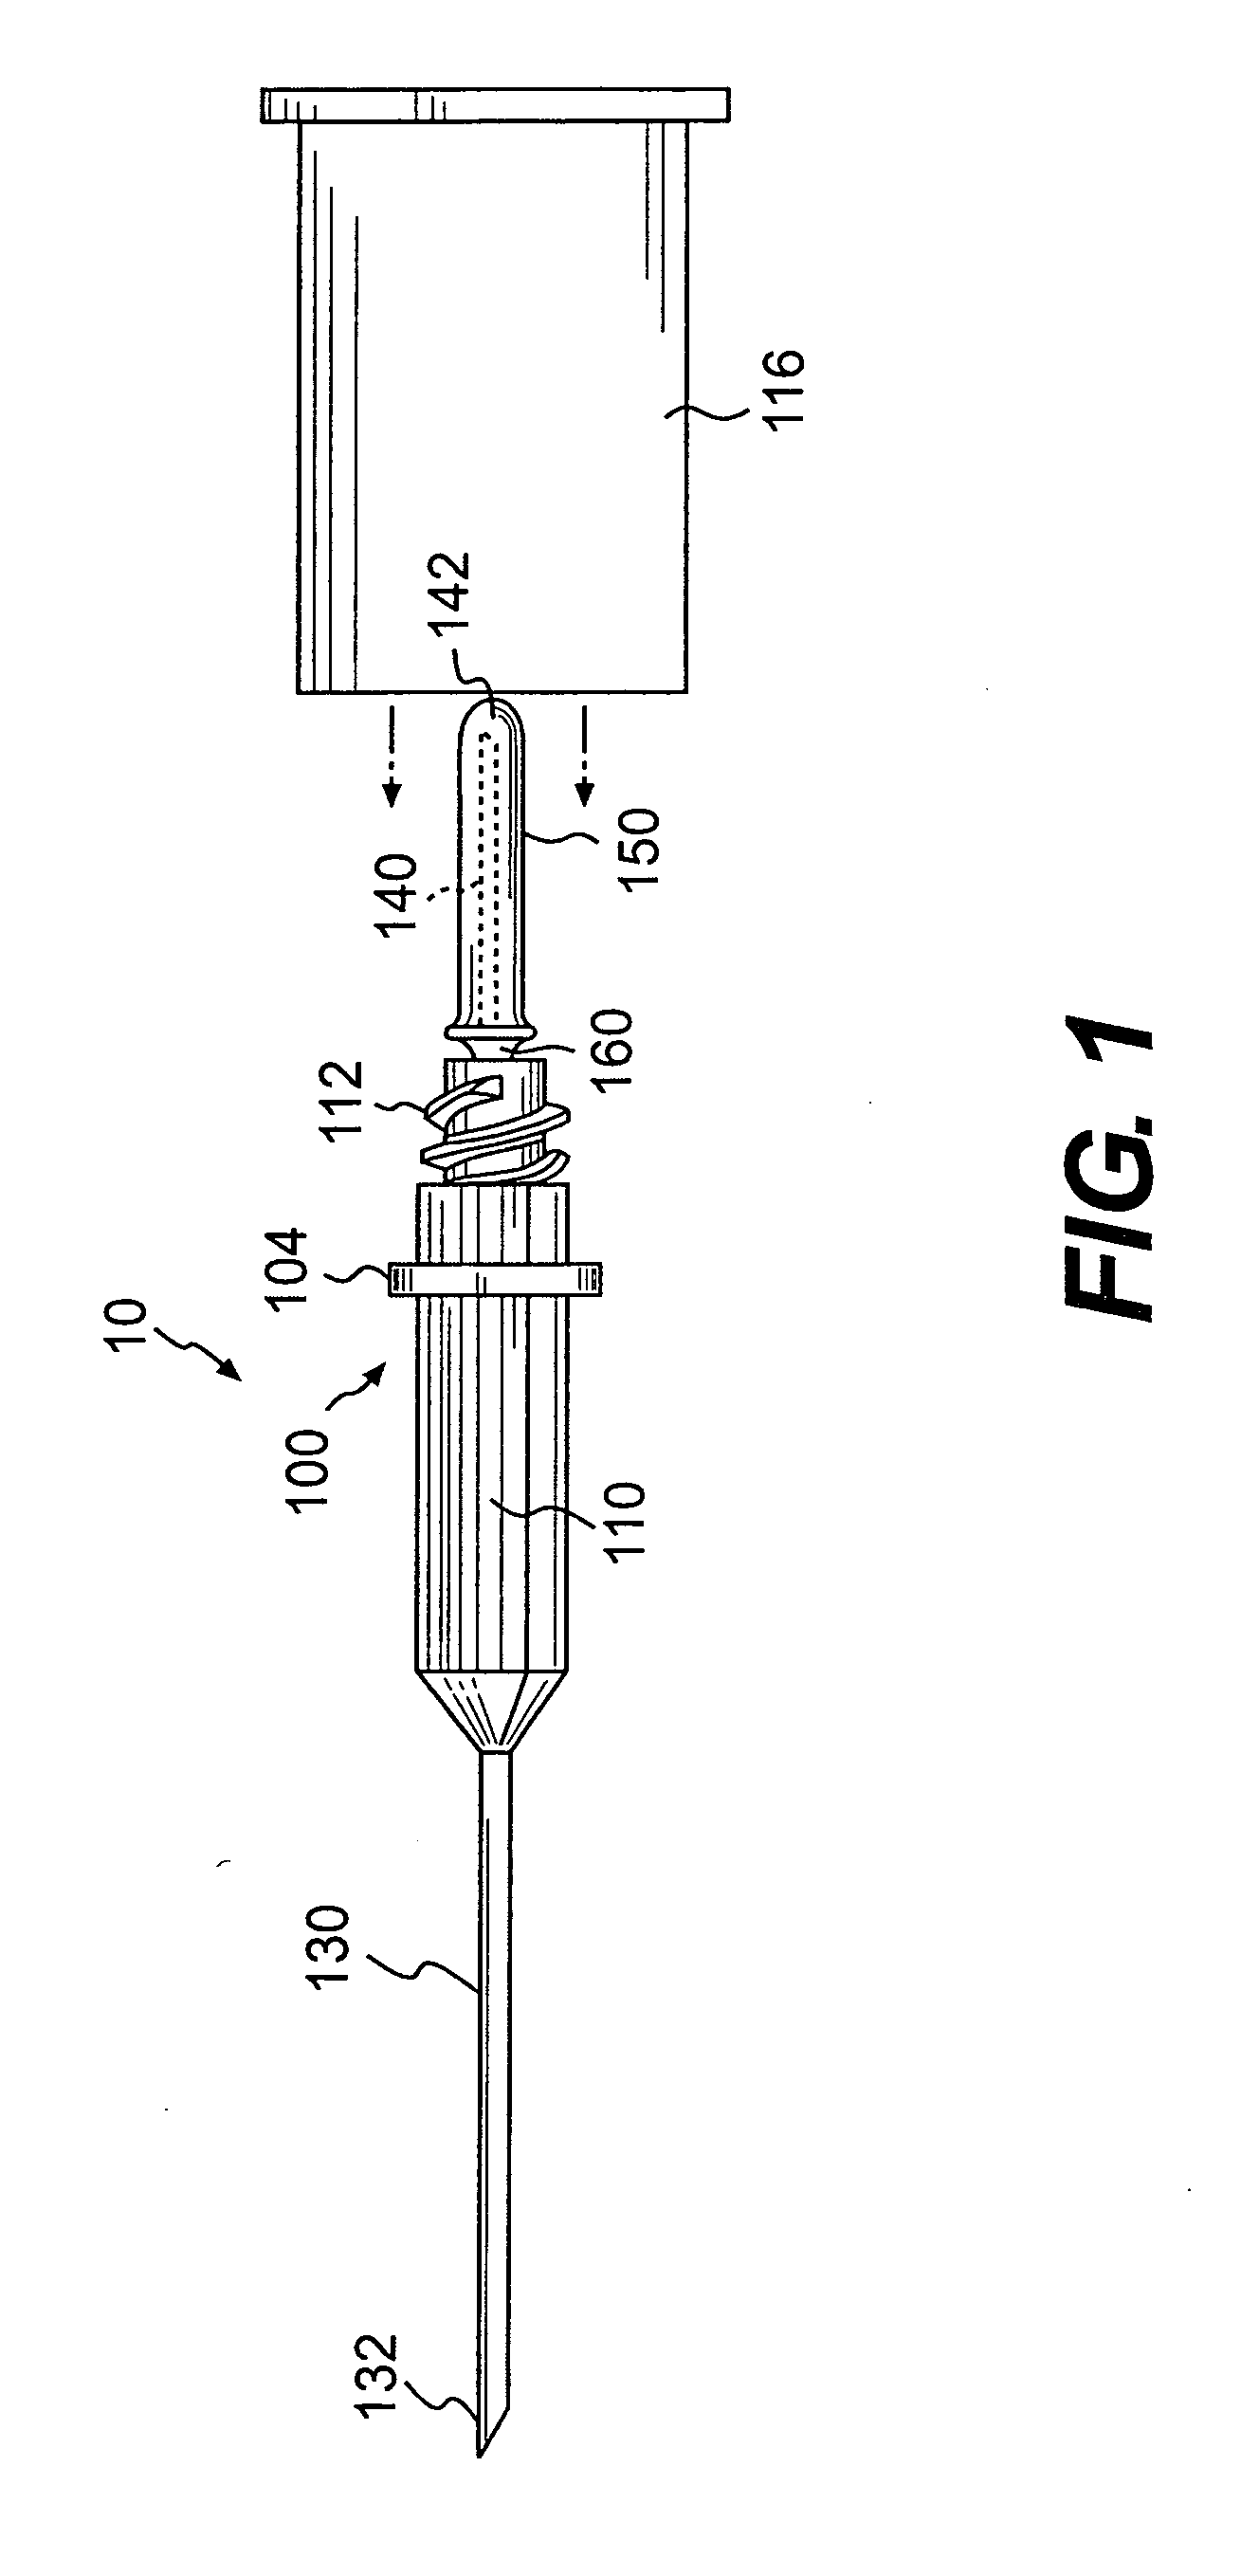 Blood drawing device with flash detction